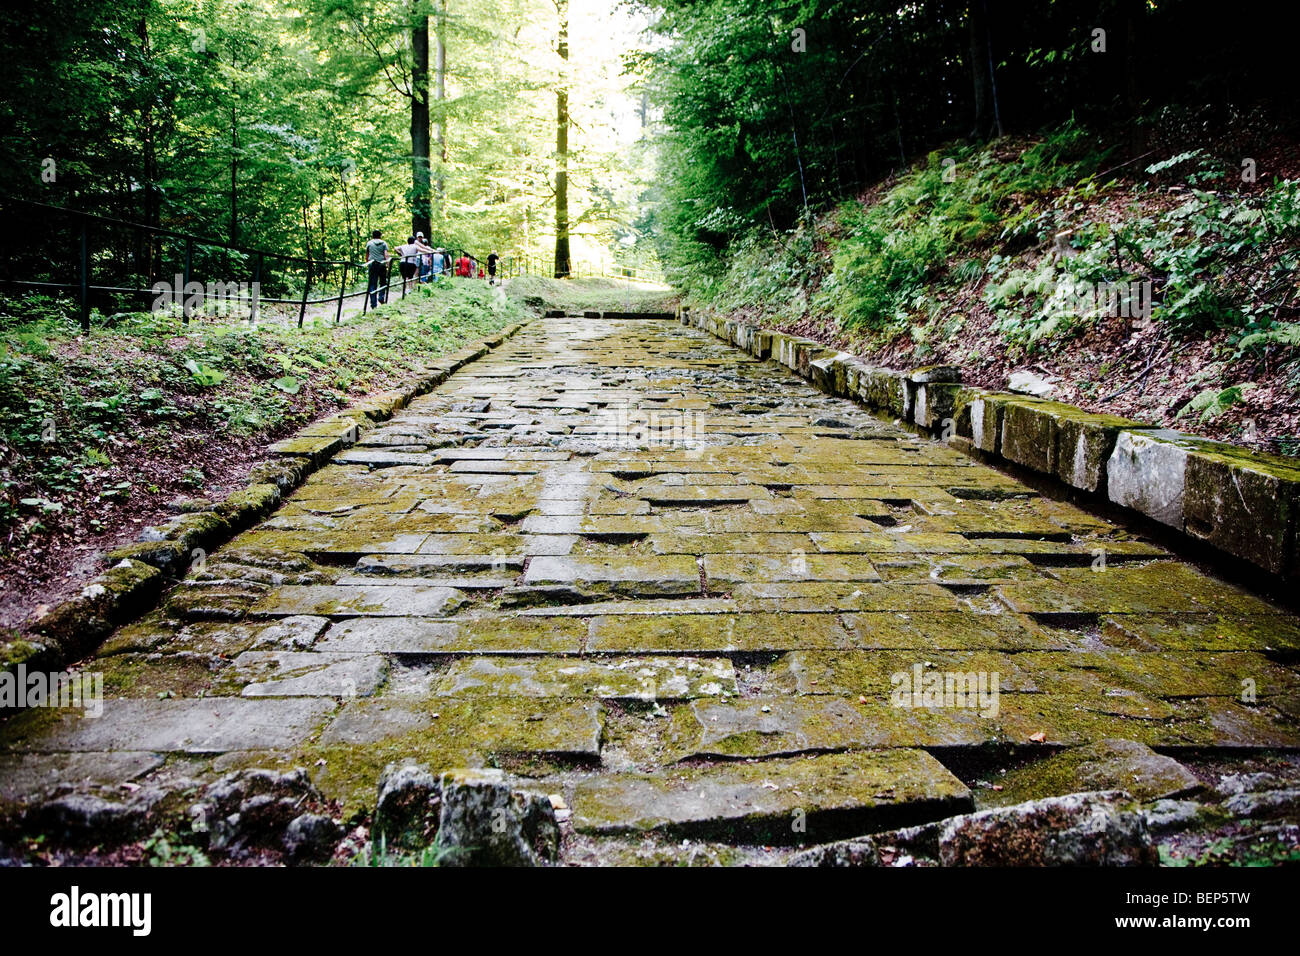 Paved trail at the stronghold of Sarmizegetusa Regia (capital of the dacian kingdom before the roman conquest), Romania Stock Photo